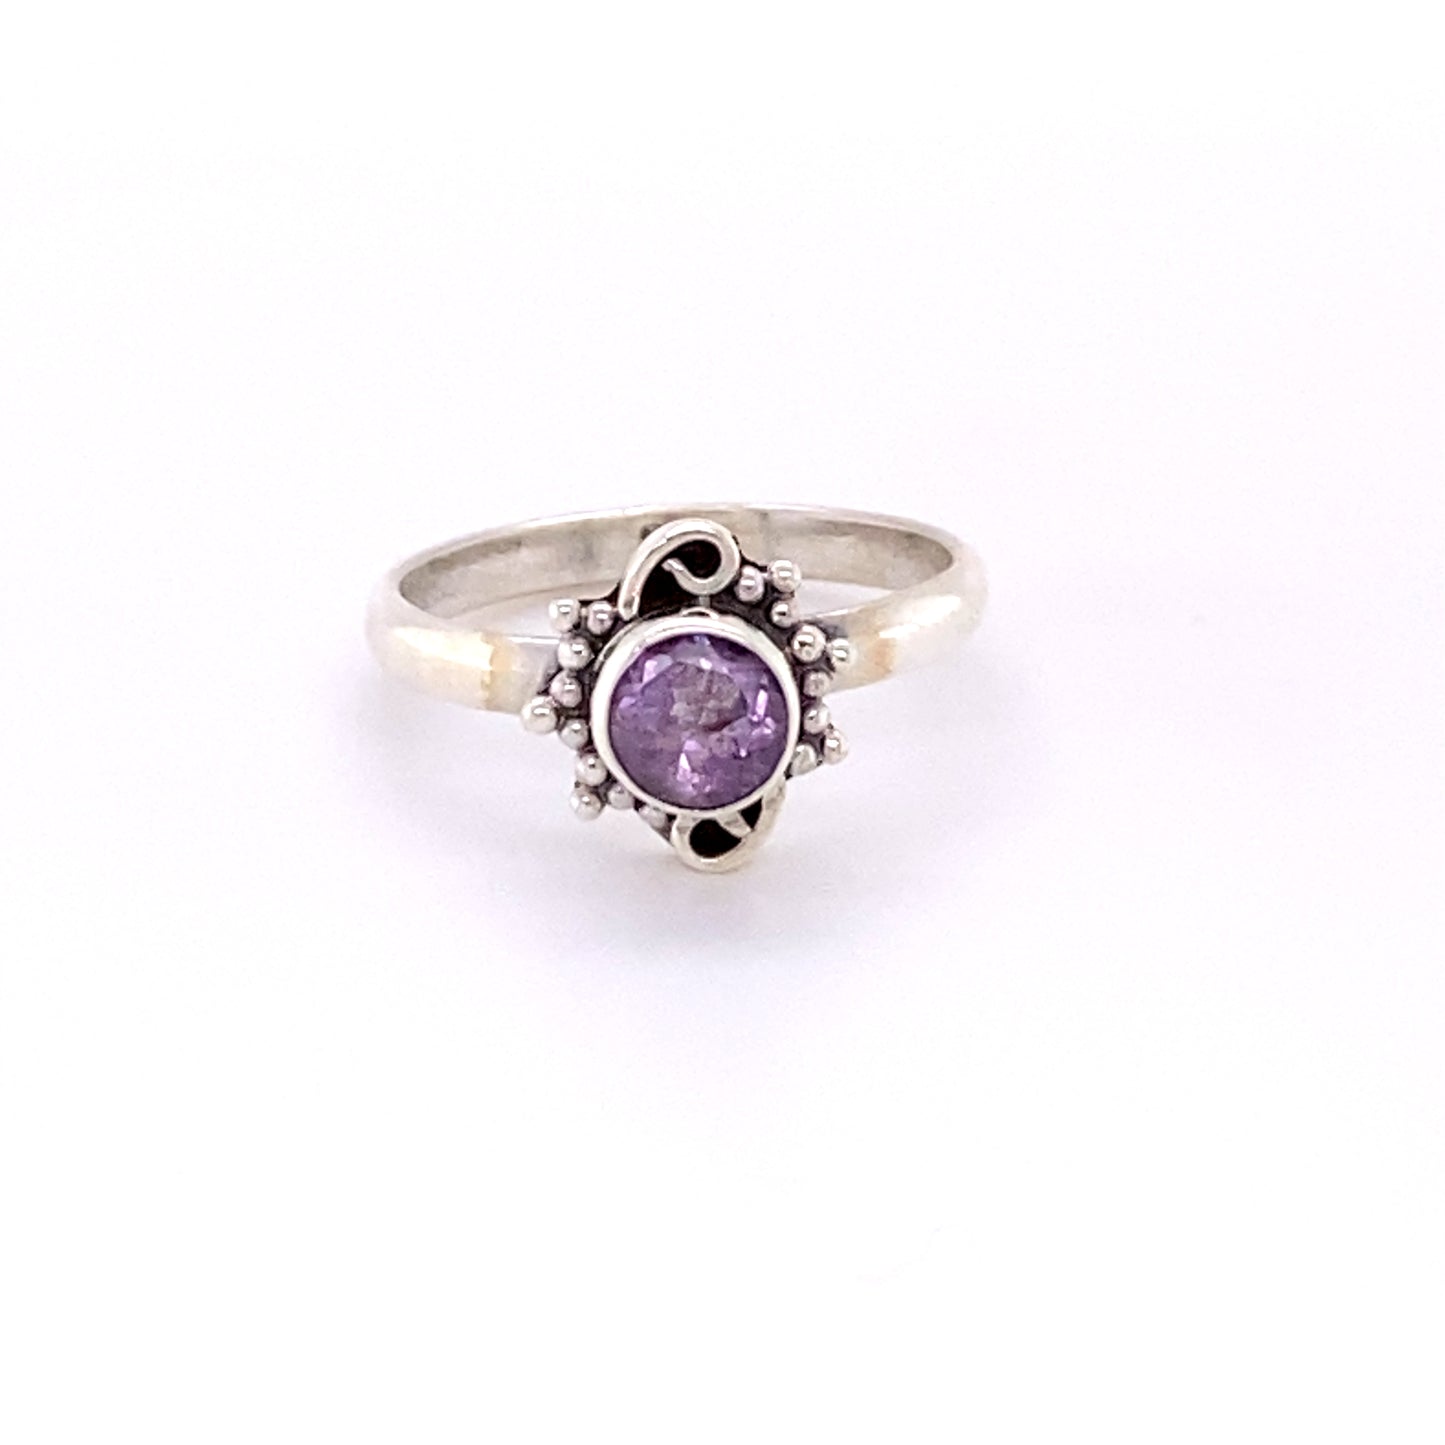 Small Round Gemstone Ring with Bead and Swirl Border in sterling silver.